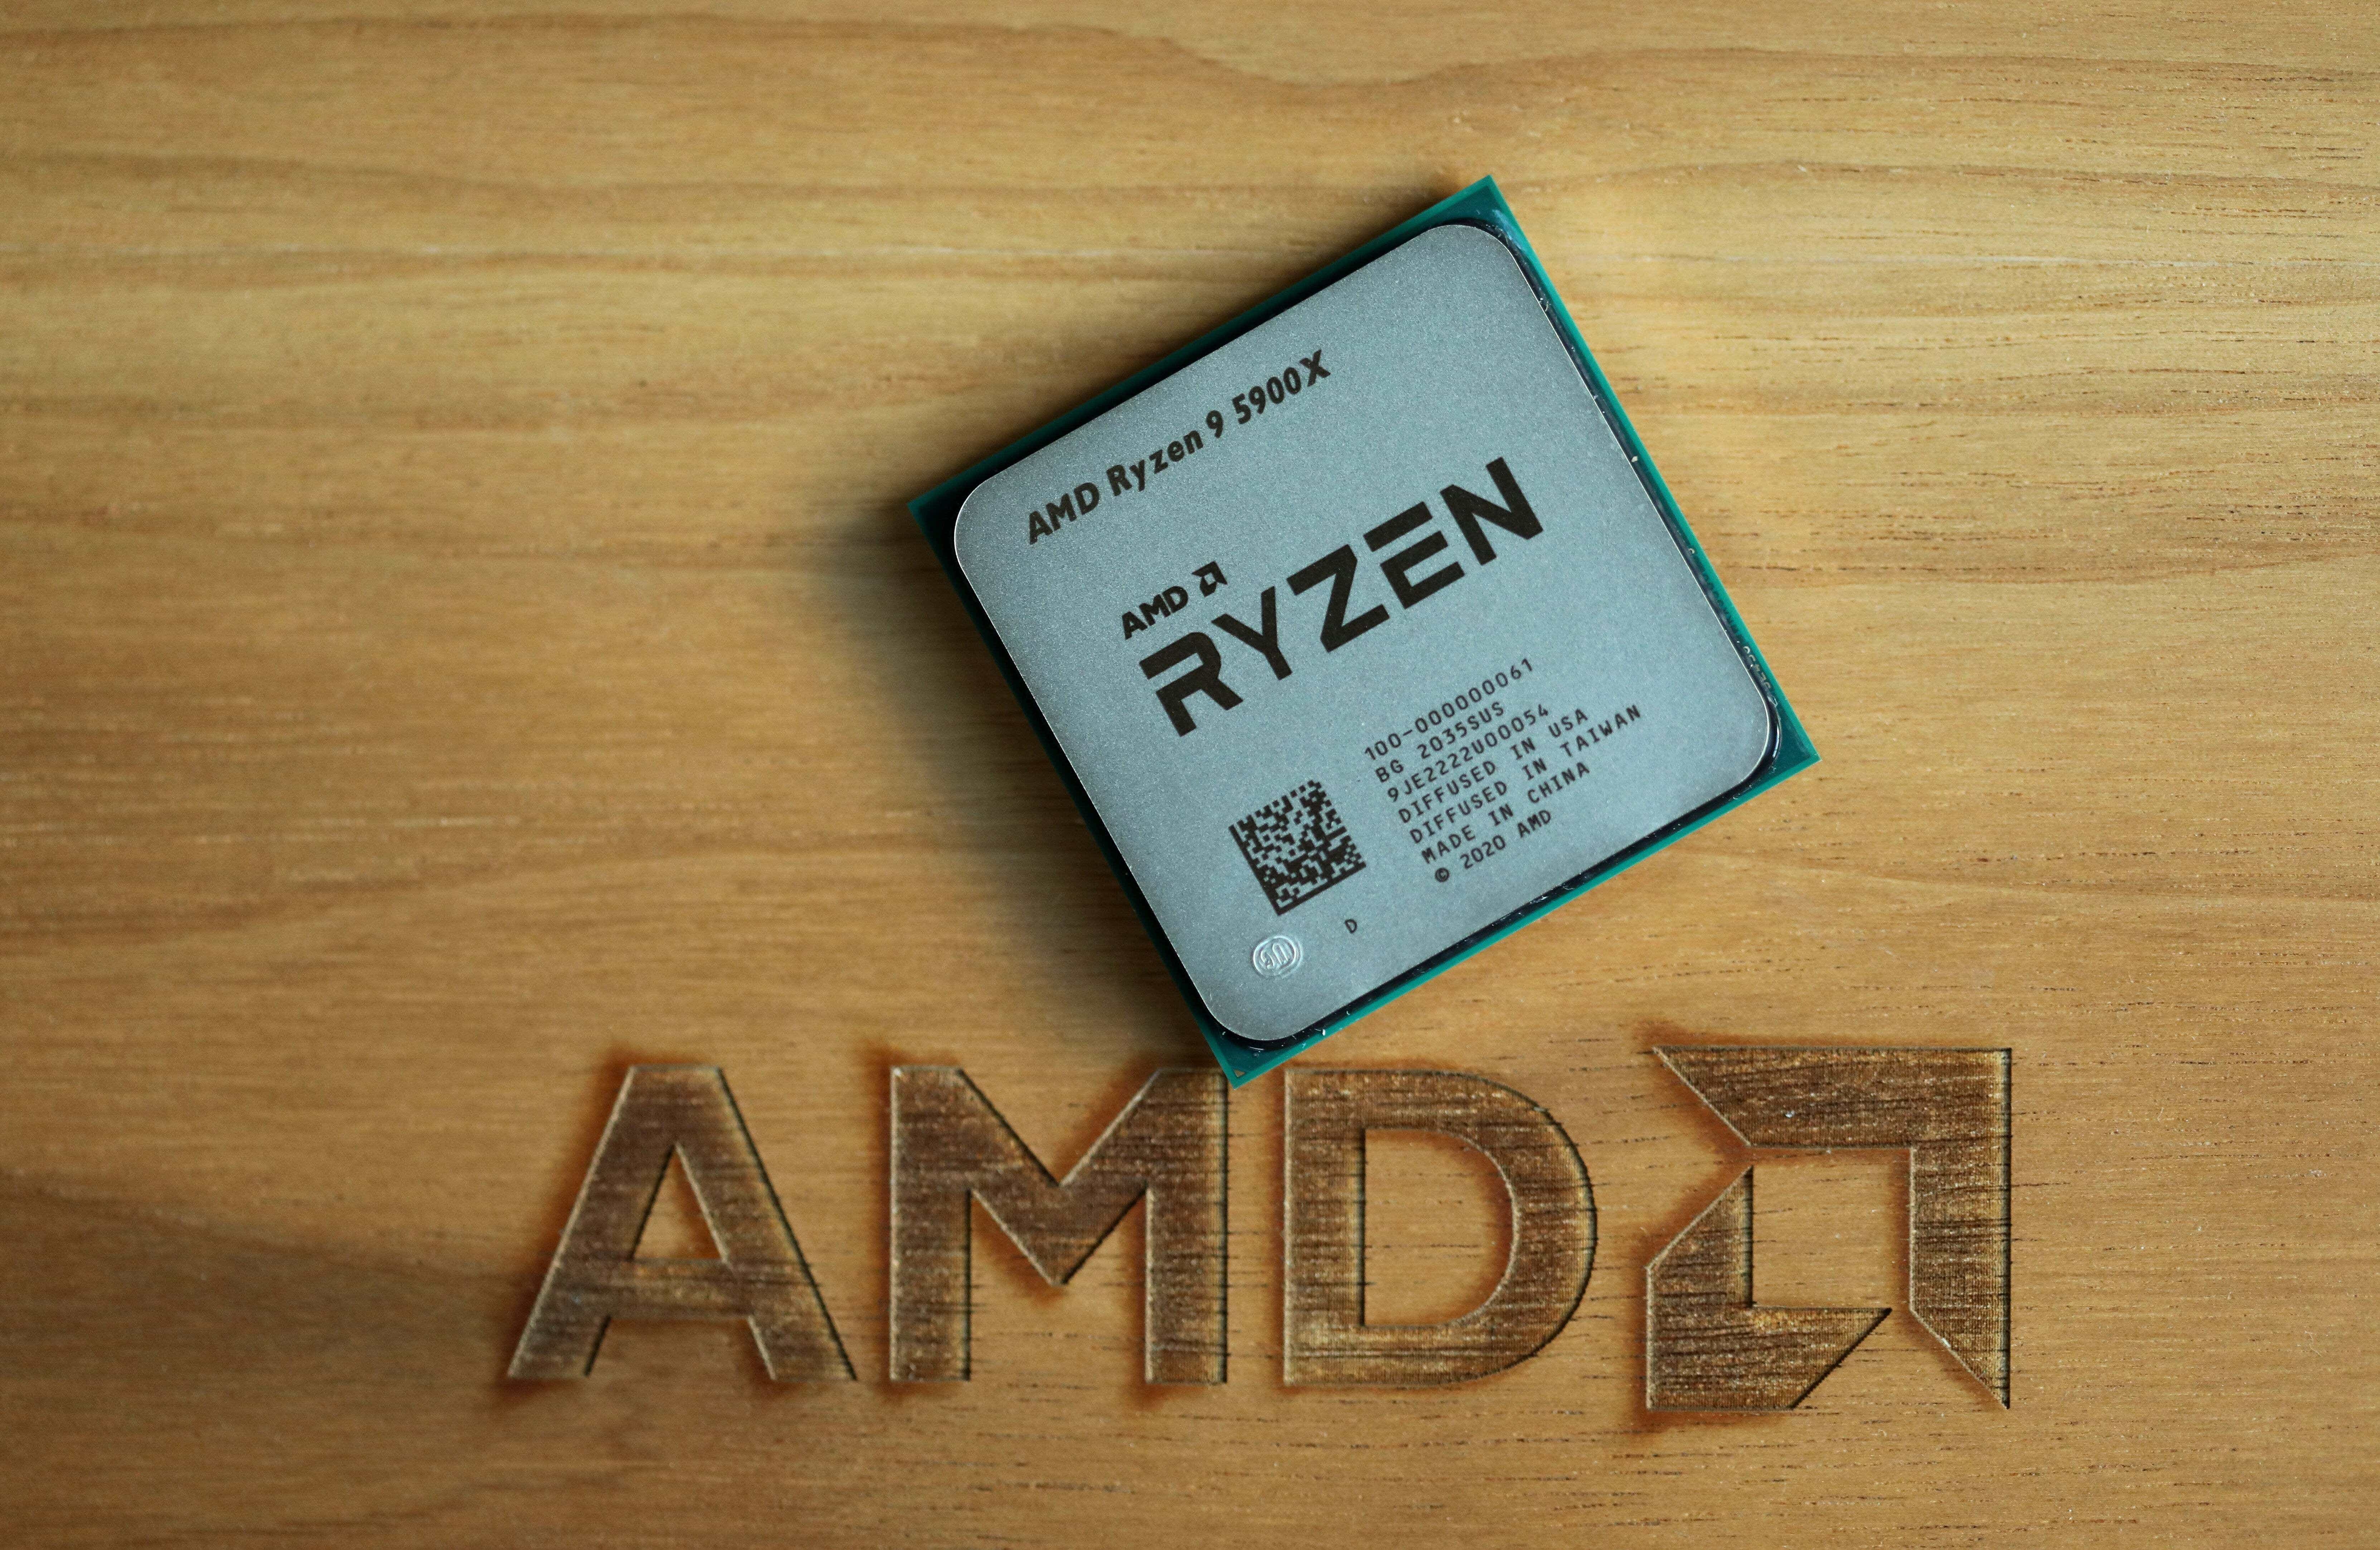 AMD Ryzen 9 5900X on a wood background with AMD logo burned into the wood